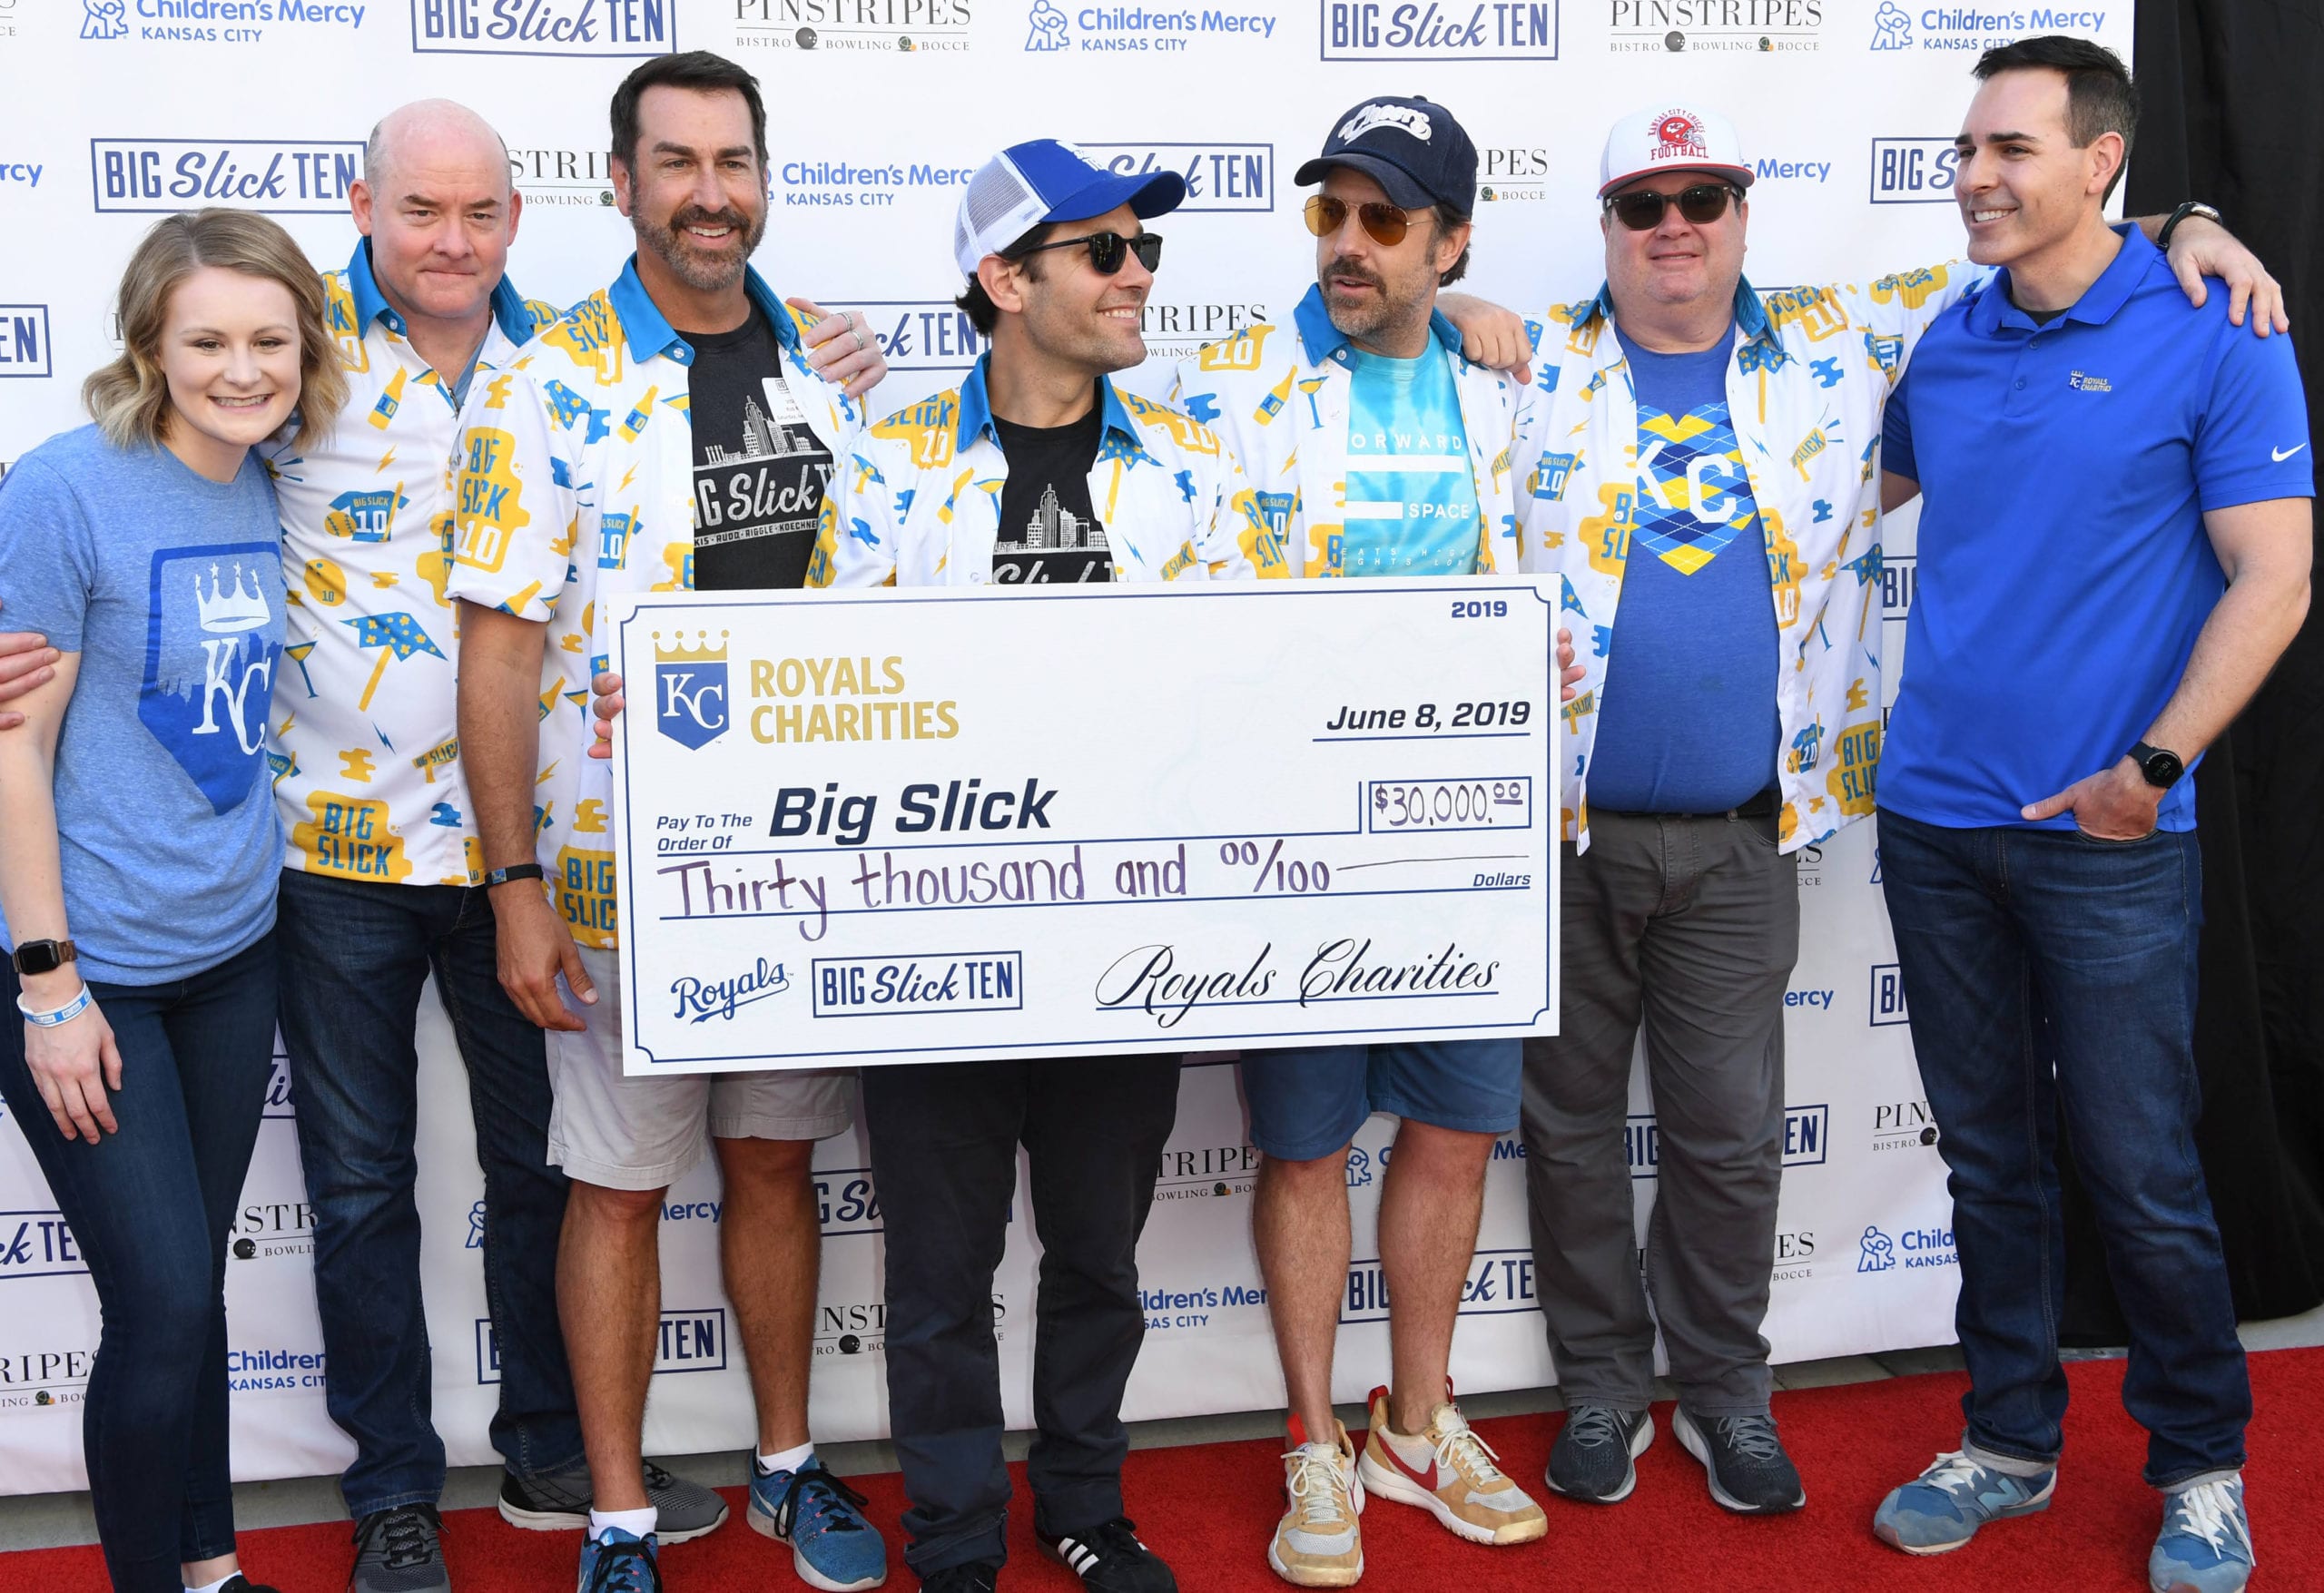 Hosts of the Big Slick collect funds for Children's Mercy.